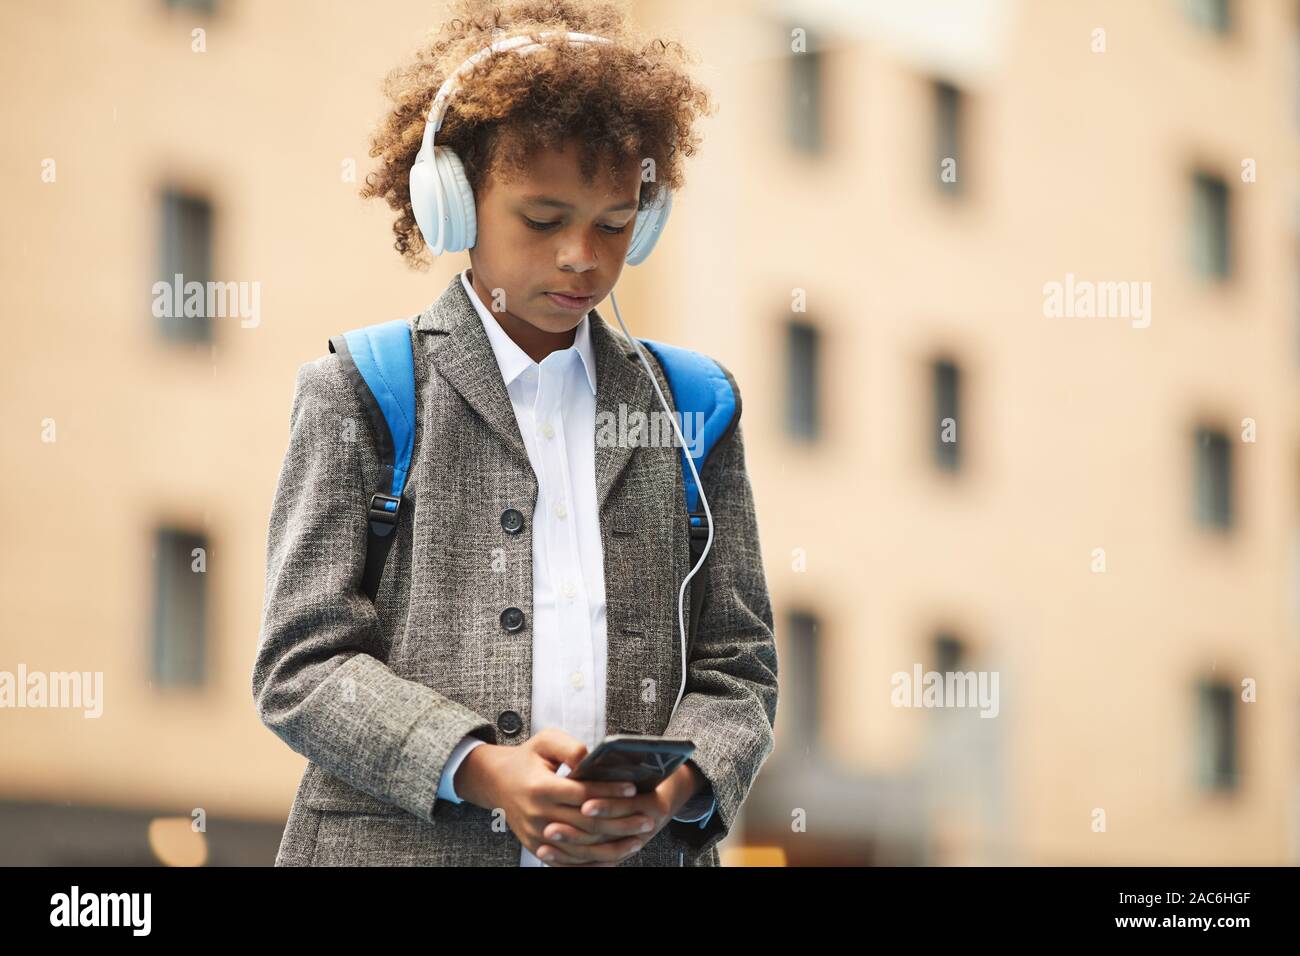 African schoolboy in headphones listening to music on his mobile phone while standing outdoors Stock Photo